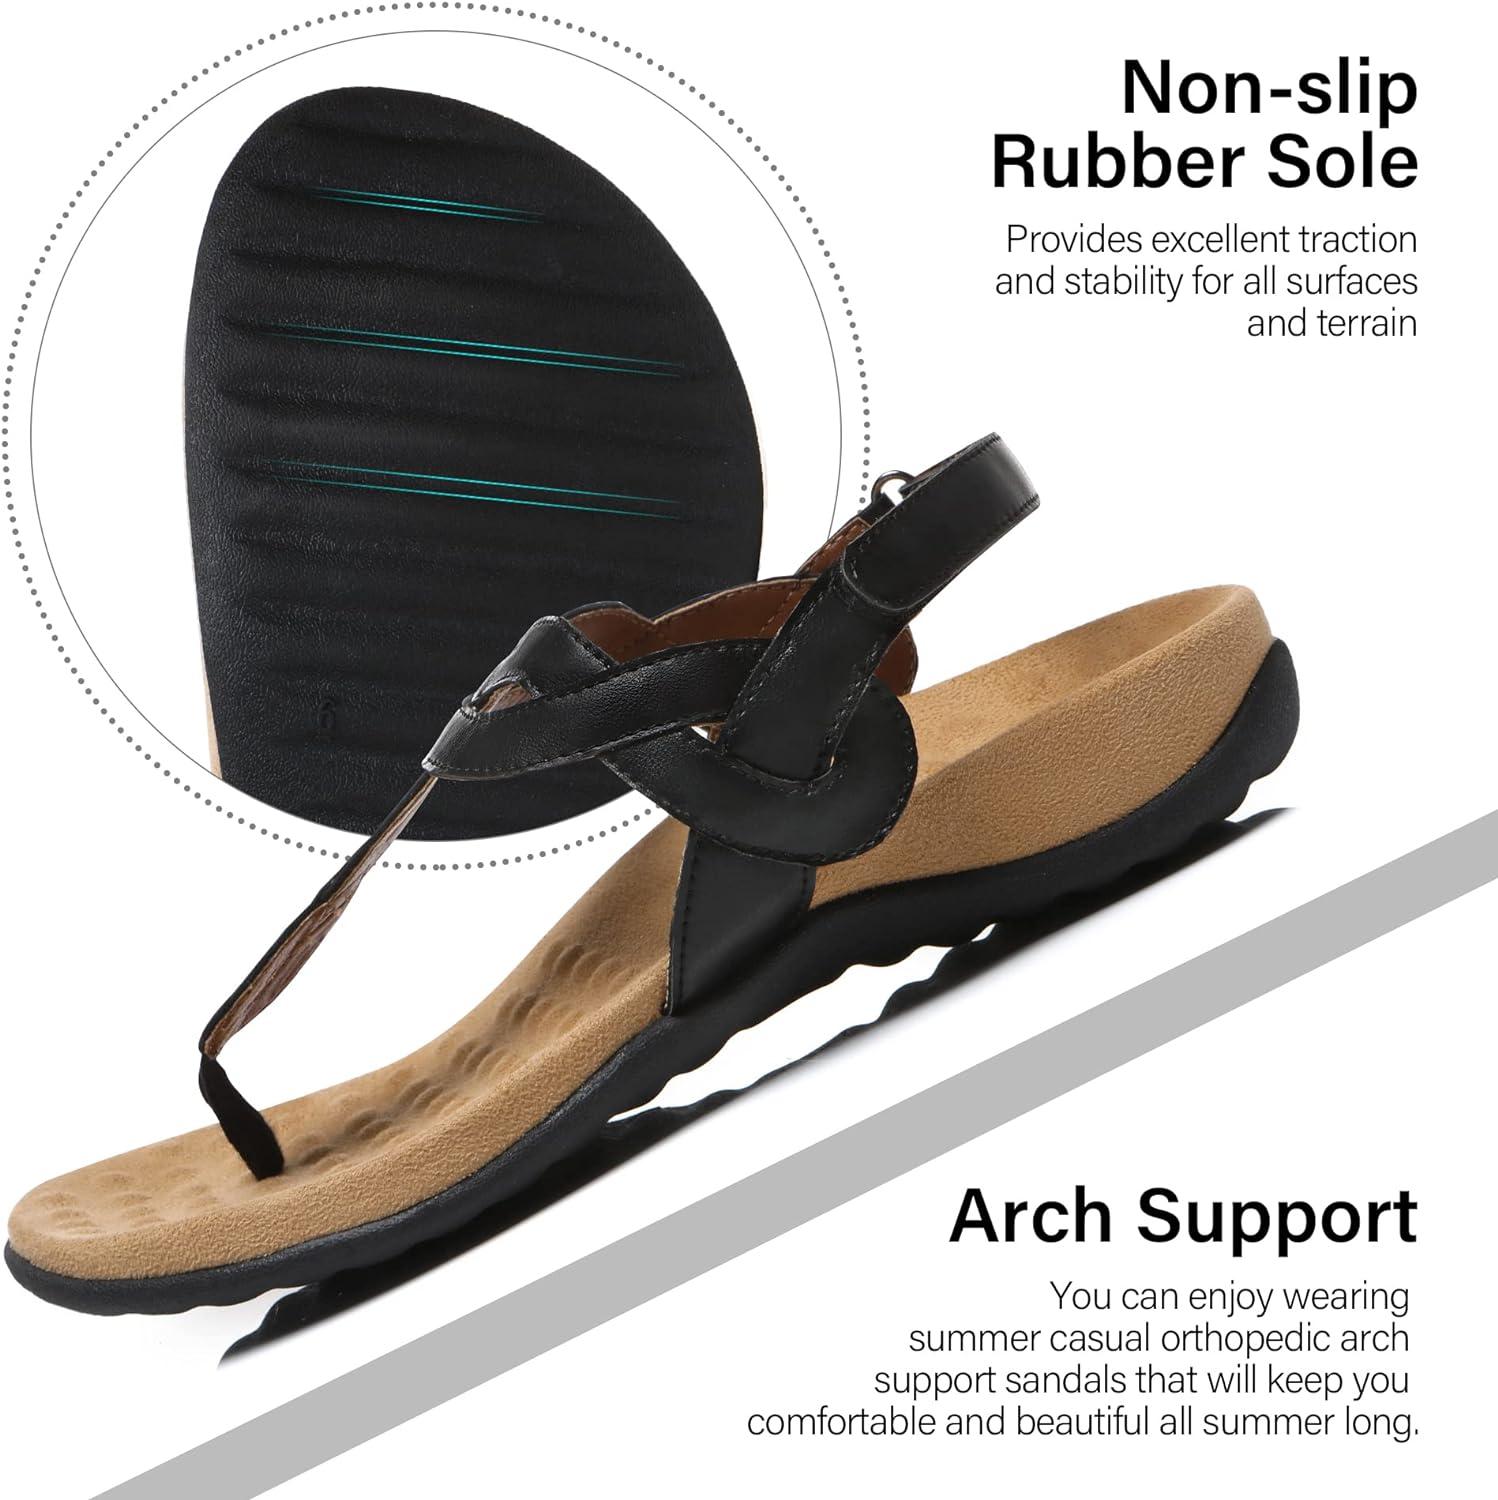 FUDYNMALC Womens Orthotic Flips Flops Sandals Arch Support for Flat feet  Orthopedic Slides Sandals Plantar Fasciitis Comfortable Walking Thong  Sandals